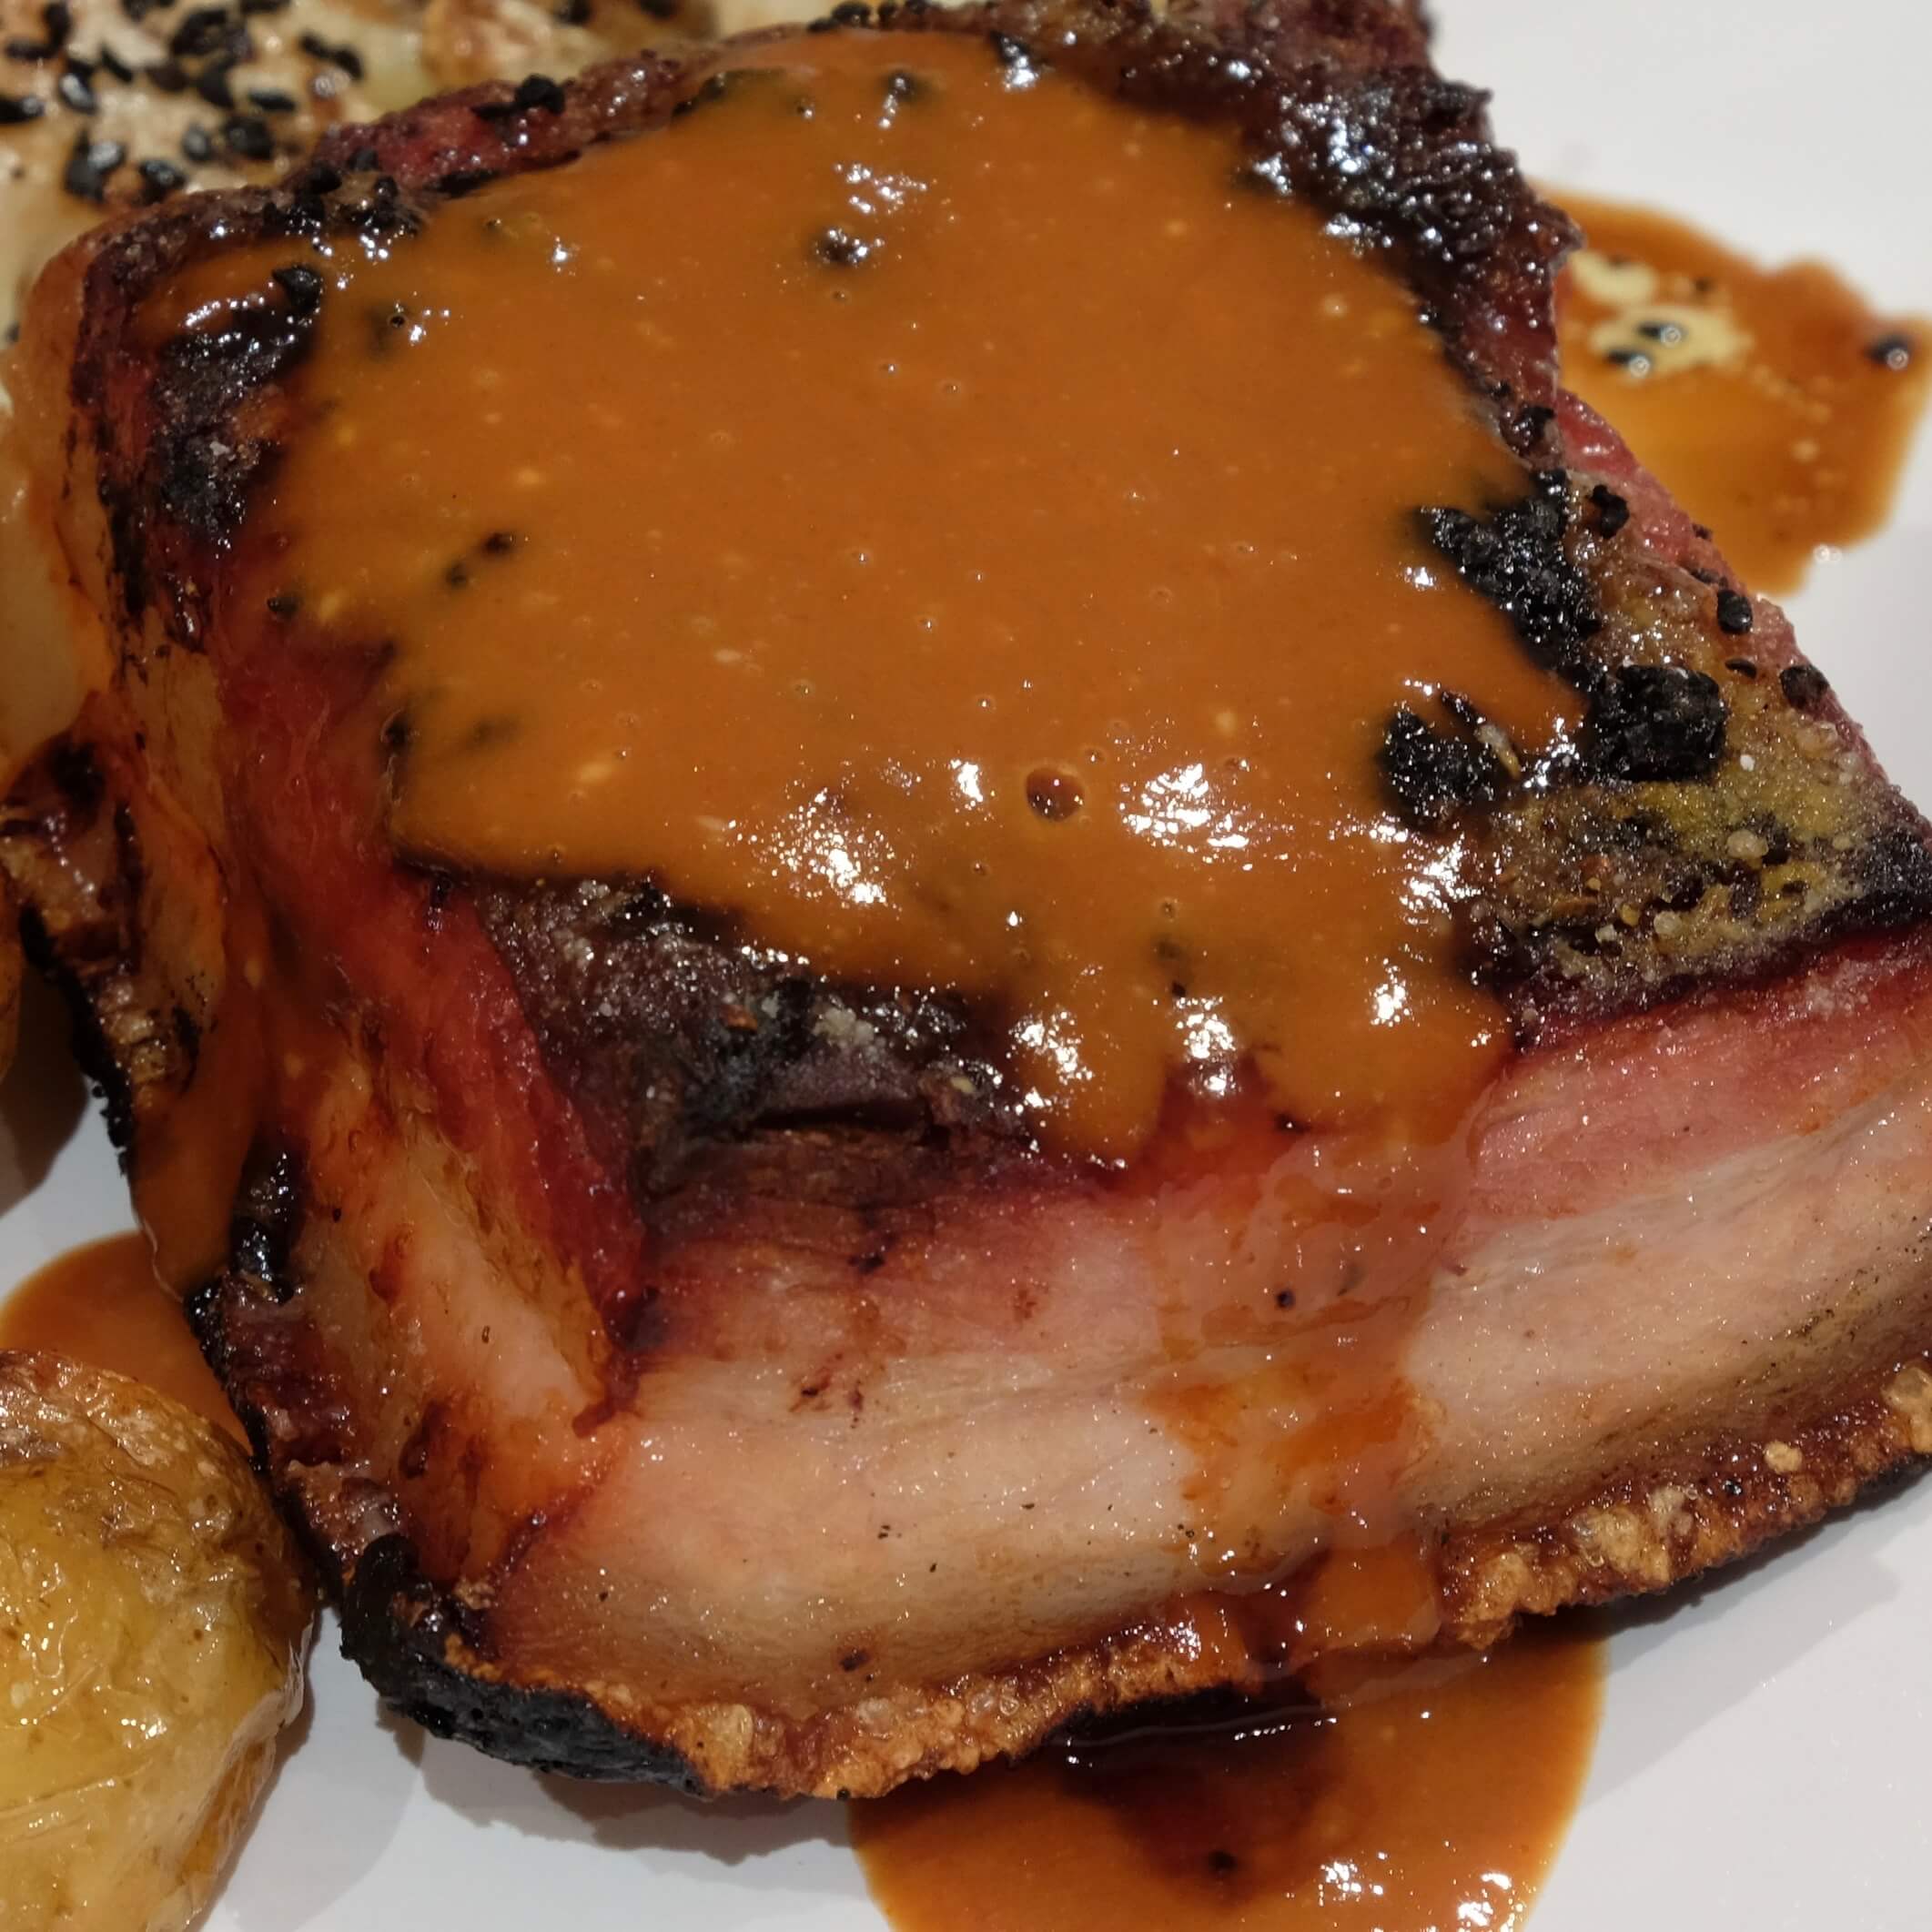  Pork belly with dipping sauce